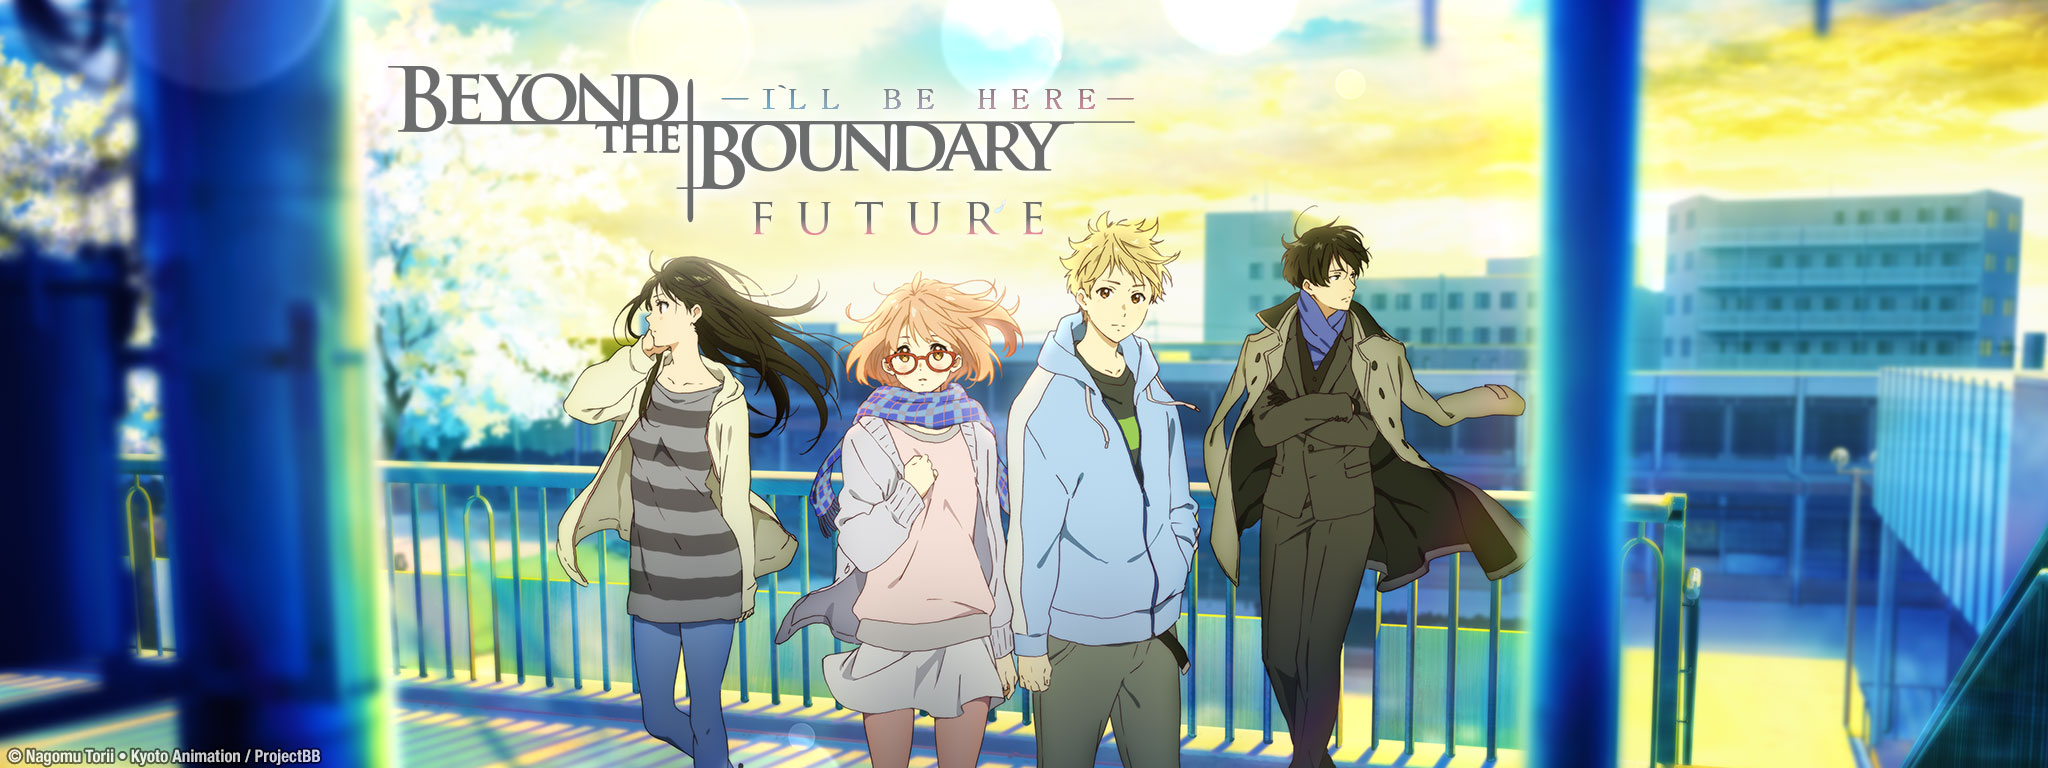 Title Art for Beyond the Boundary -I'LL BE HERE-: Future